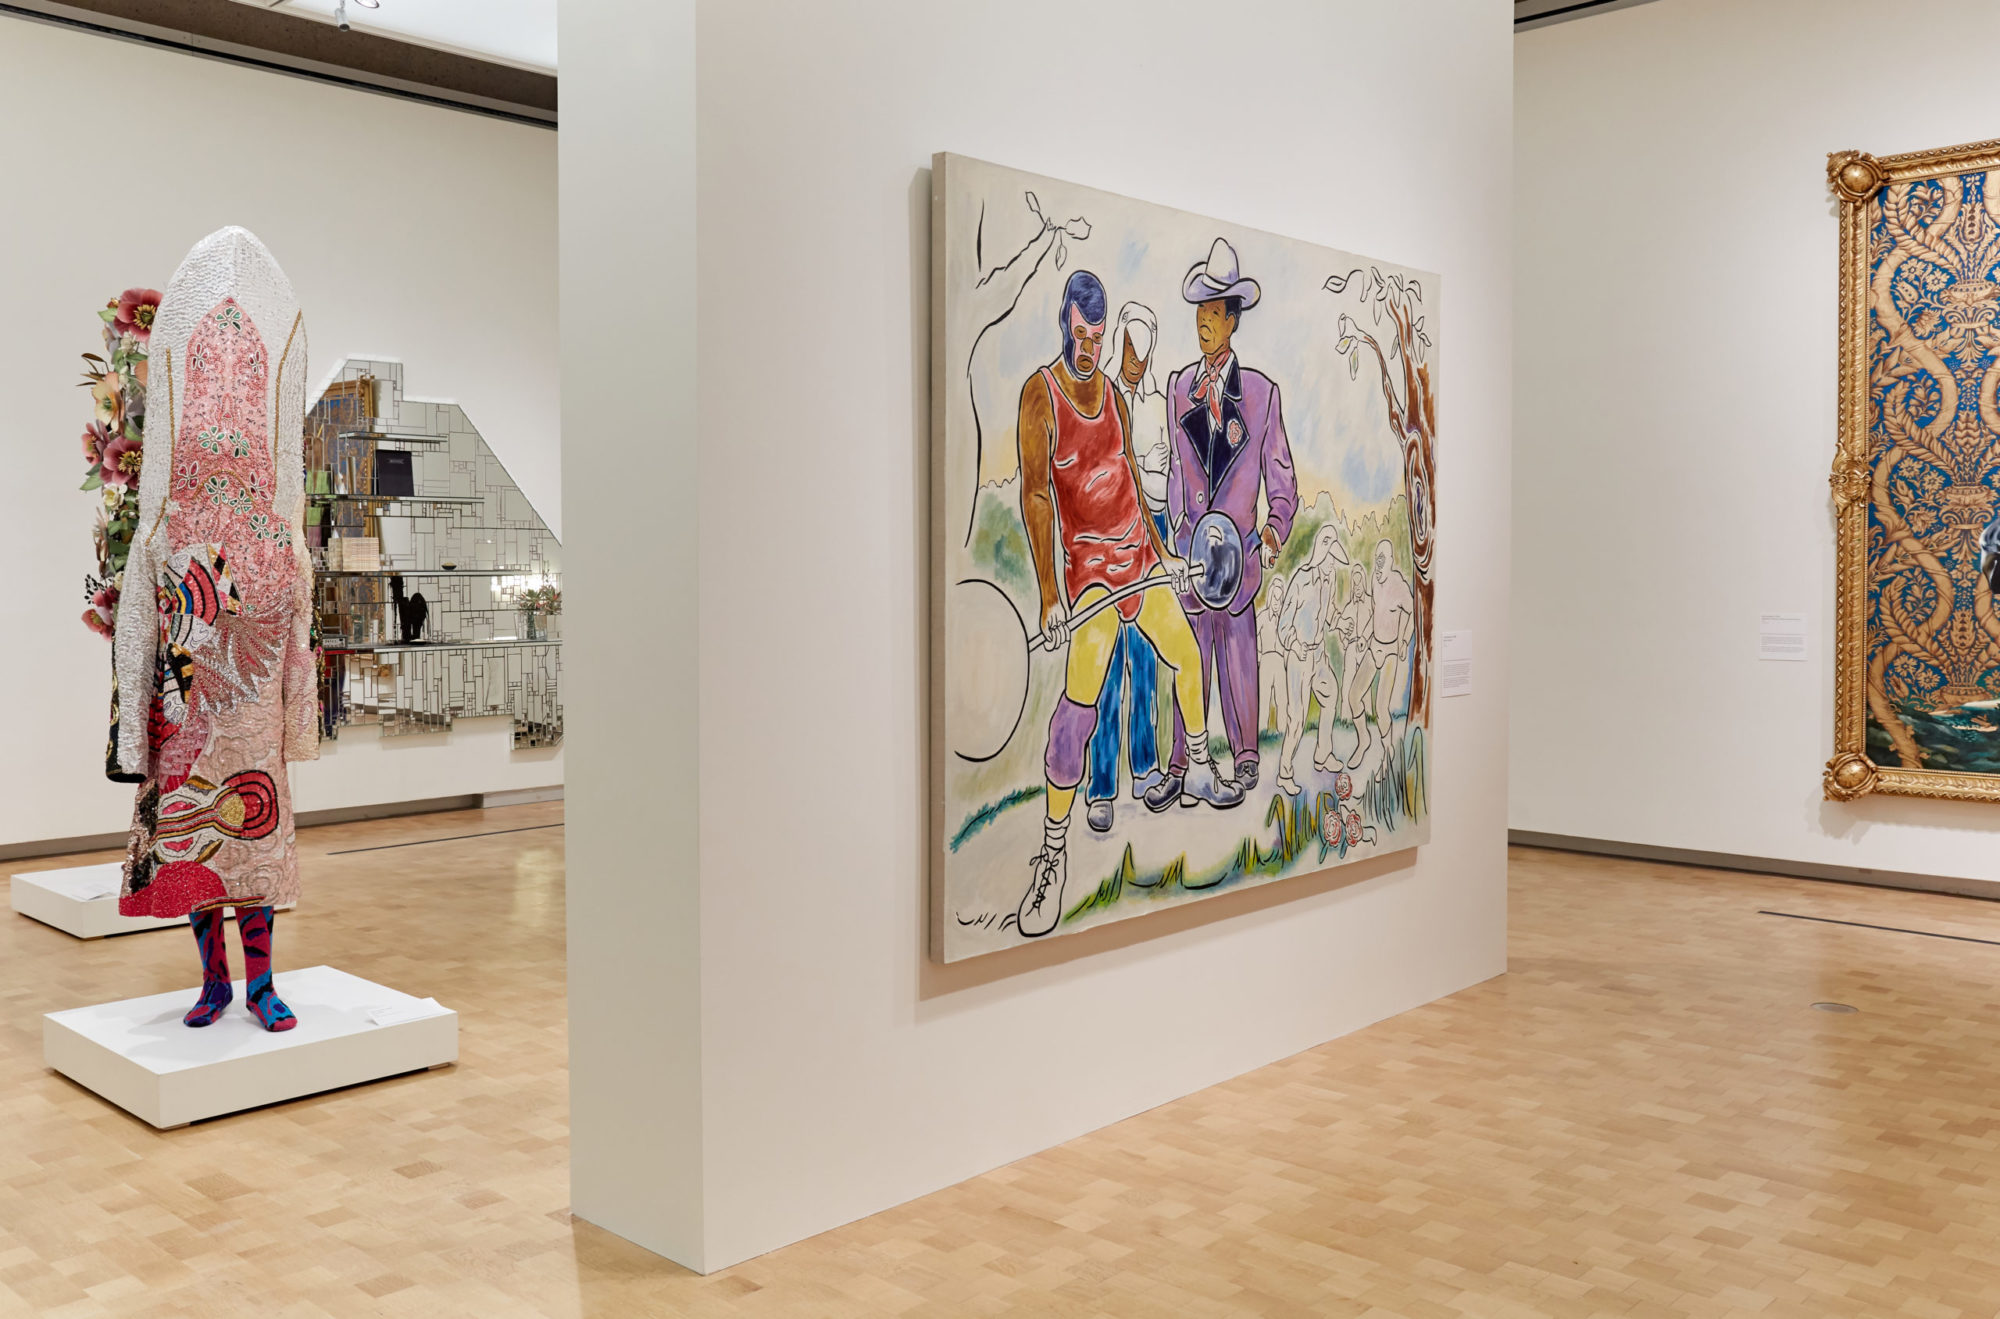 Installation view of '30 Americans;' To the left of frame stands a tall, ornately styled outfit, the middle hangs a large painting of a weight-lifter and just out of frame is an ornately framed painting